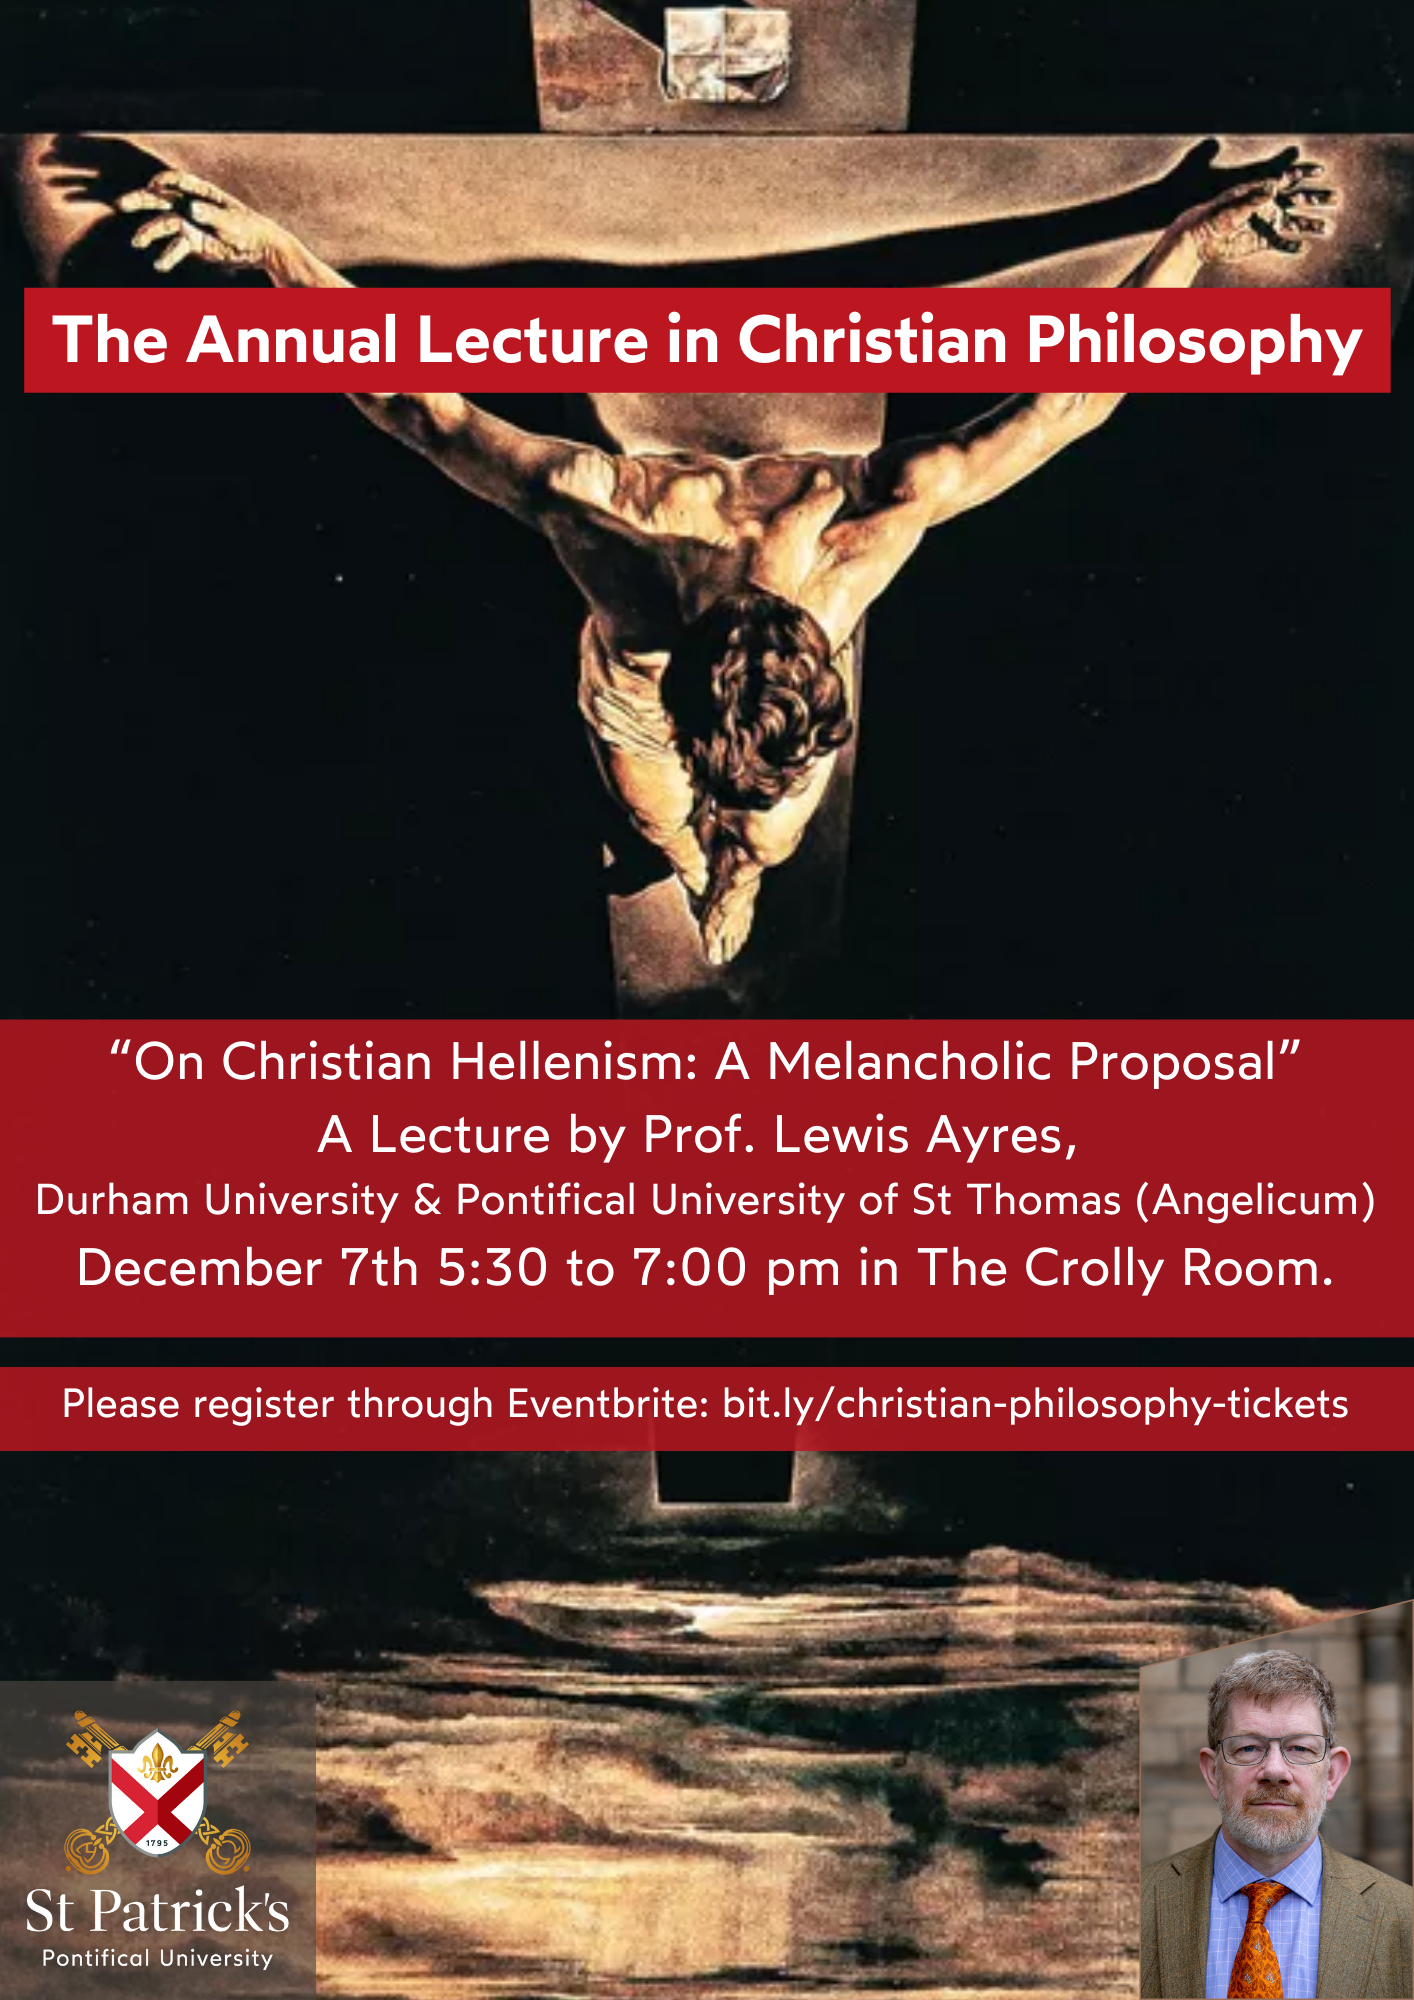 The-Annual-Lecture-in-Christian-Philosophy-1.png#asset:14870